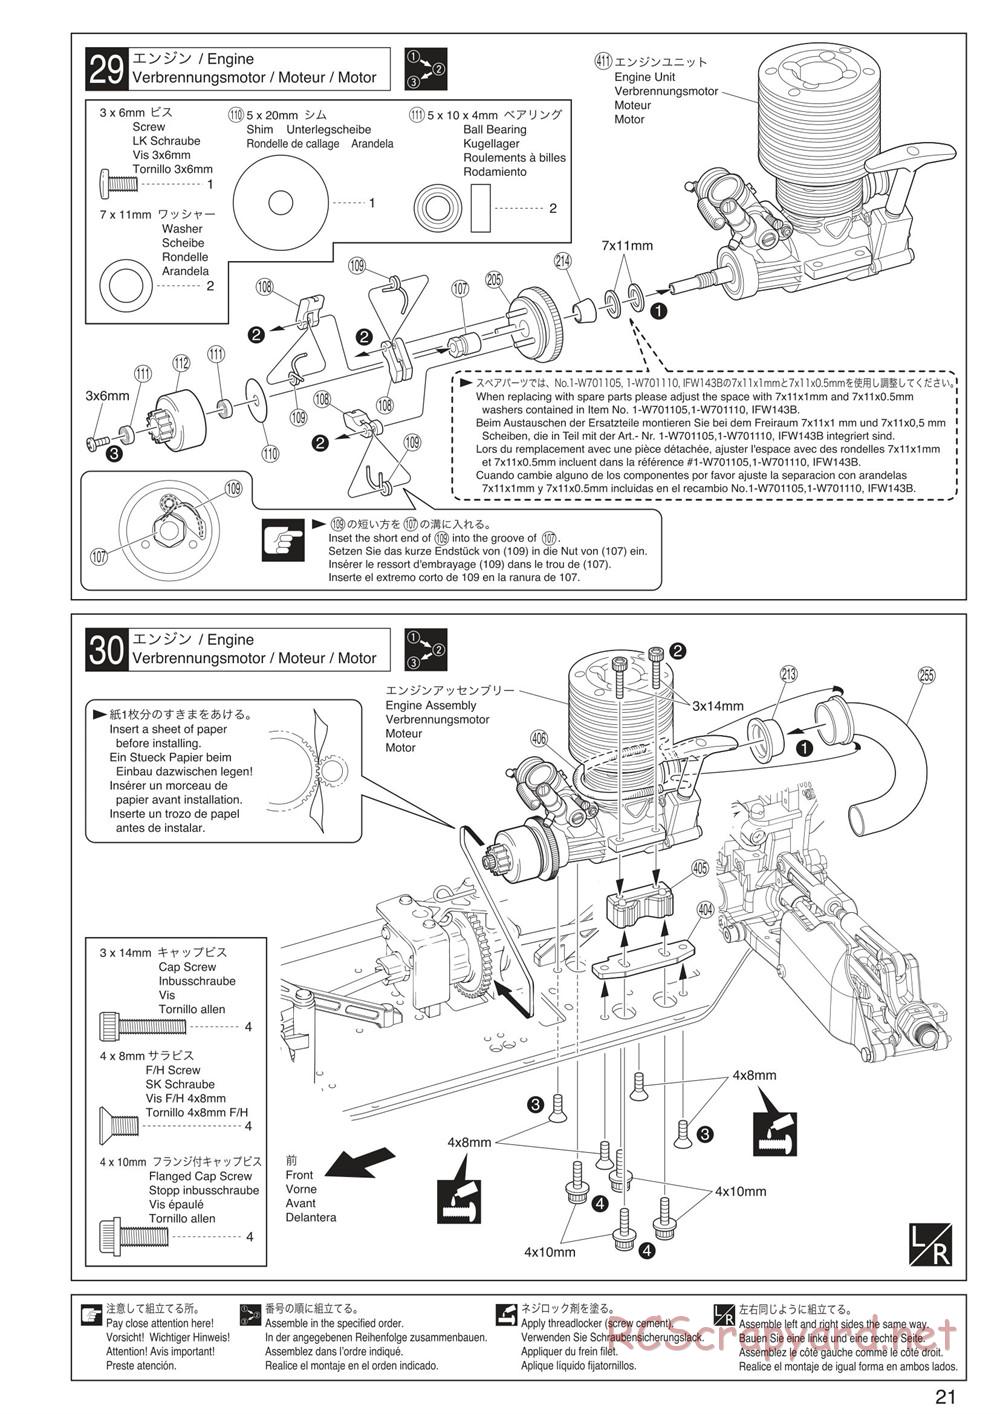 Kyosho - Inferno Neo ST 3.0 - Manual - Page 21